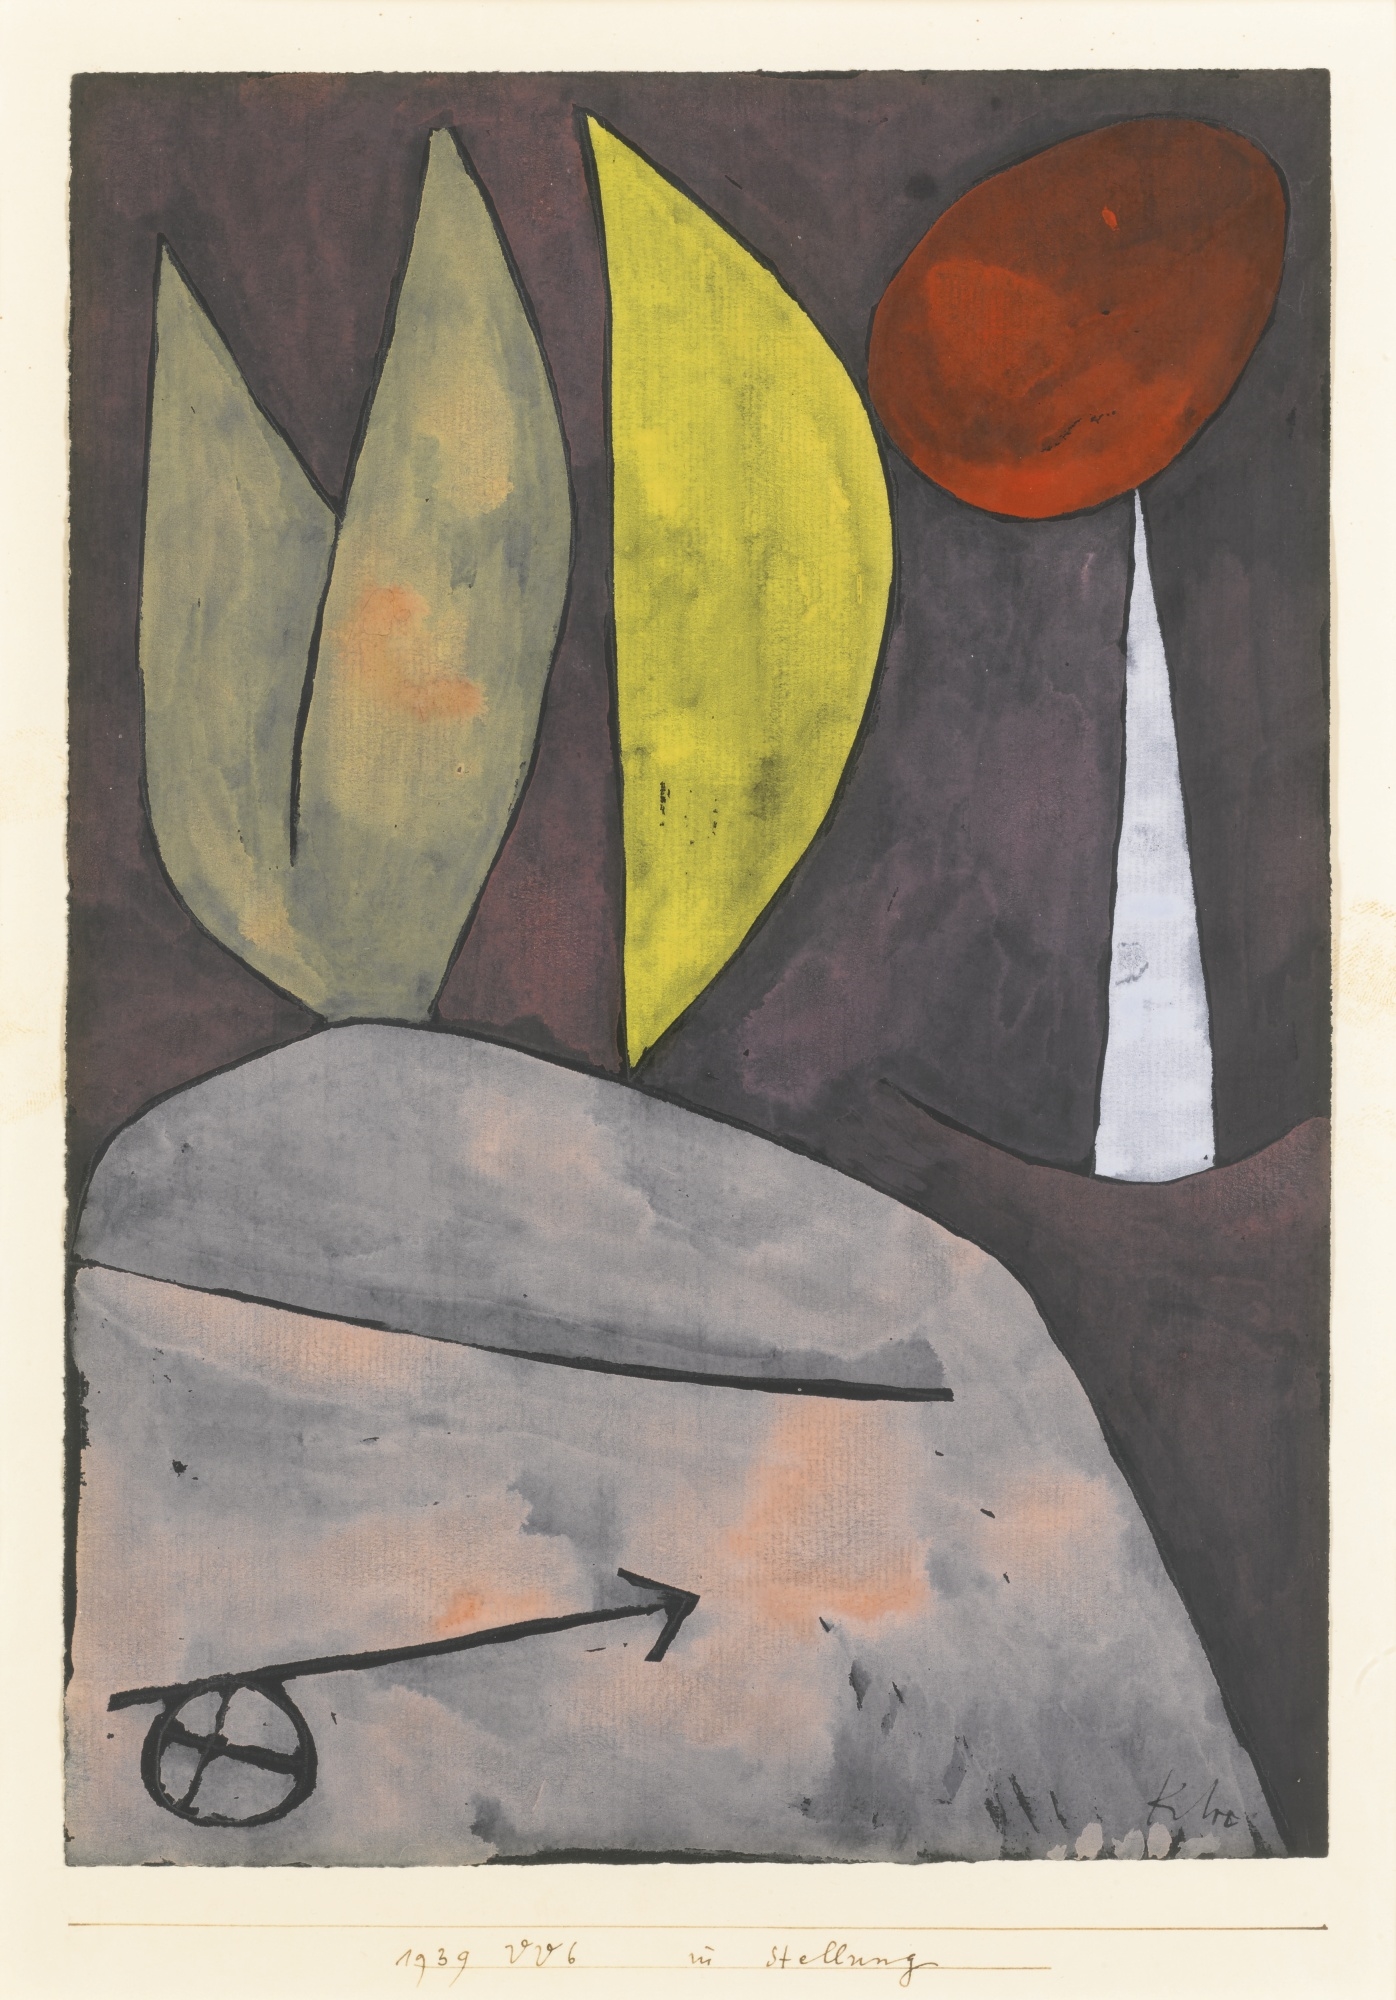 IN STELLUNG (IN POSITION) by Paul Klee, 1939